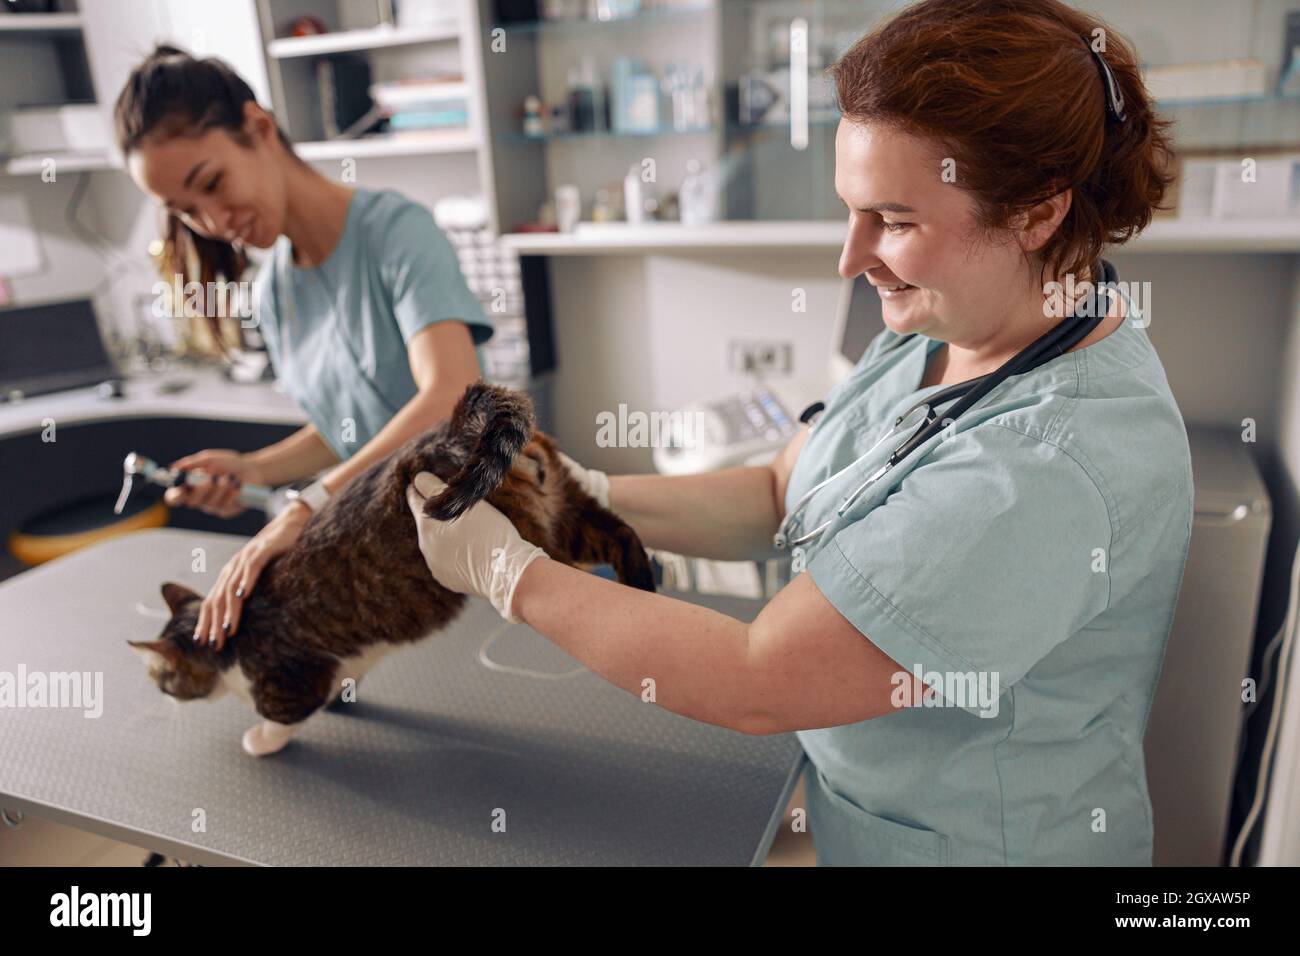 Veterinarian in uniform and gloves examines back of tabby cat with Asian nurse in office Stock Photo